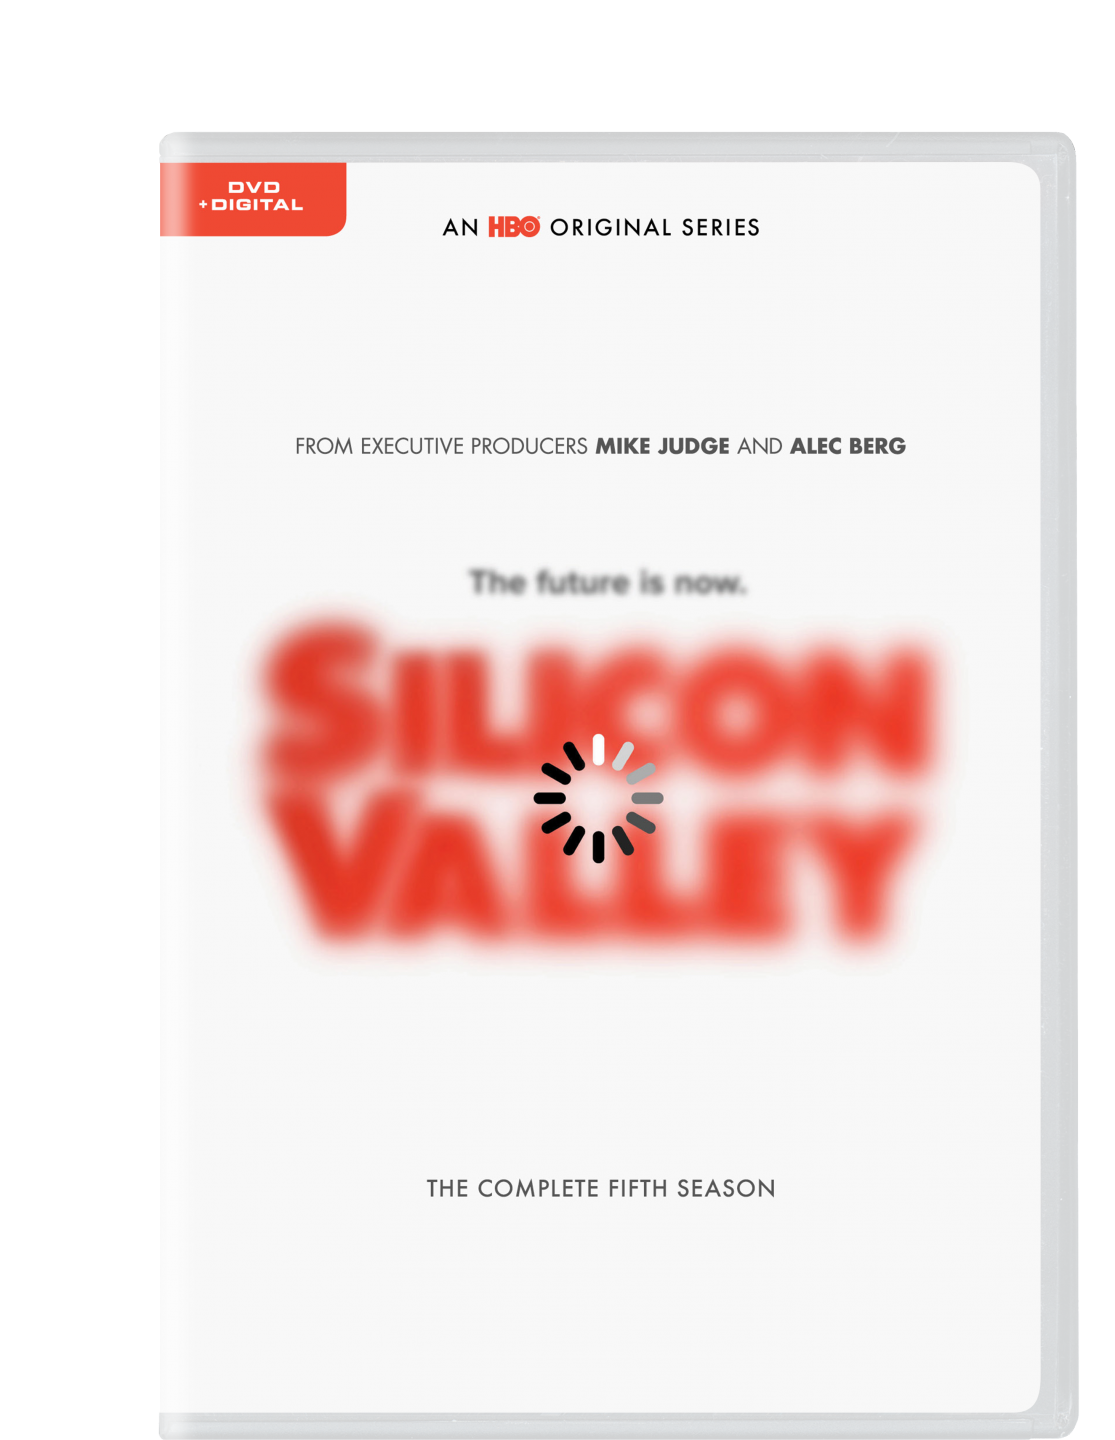 Silicon Valley: The Complete Fifth Season DVD cover (HBO)